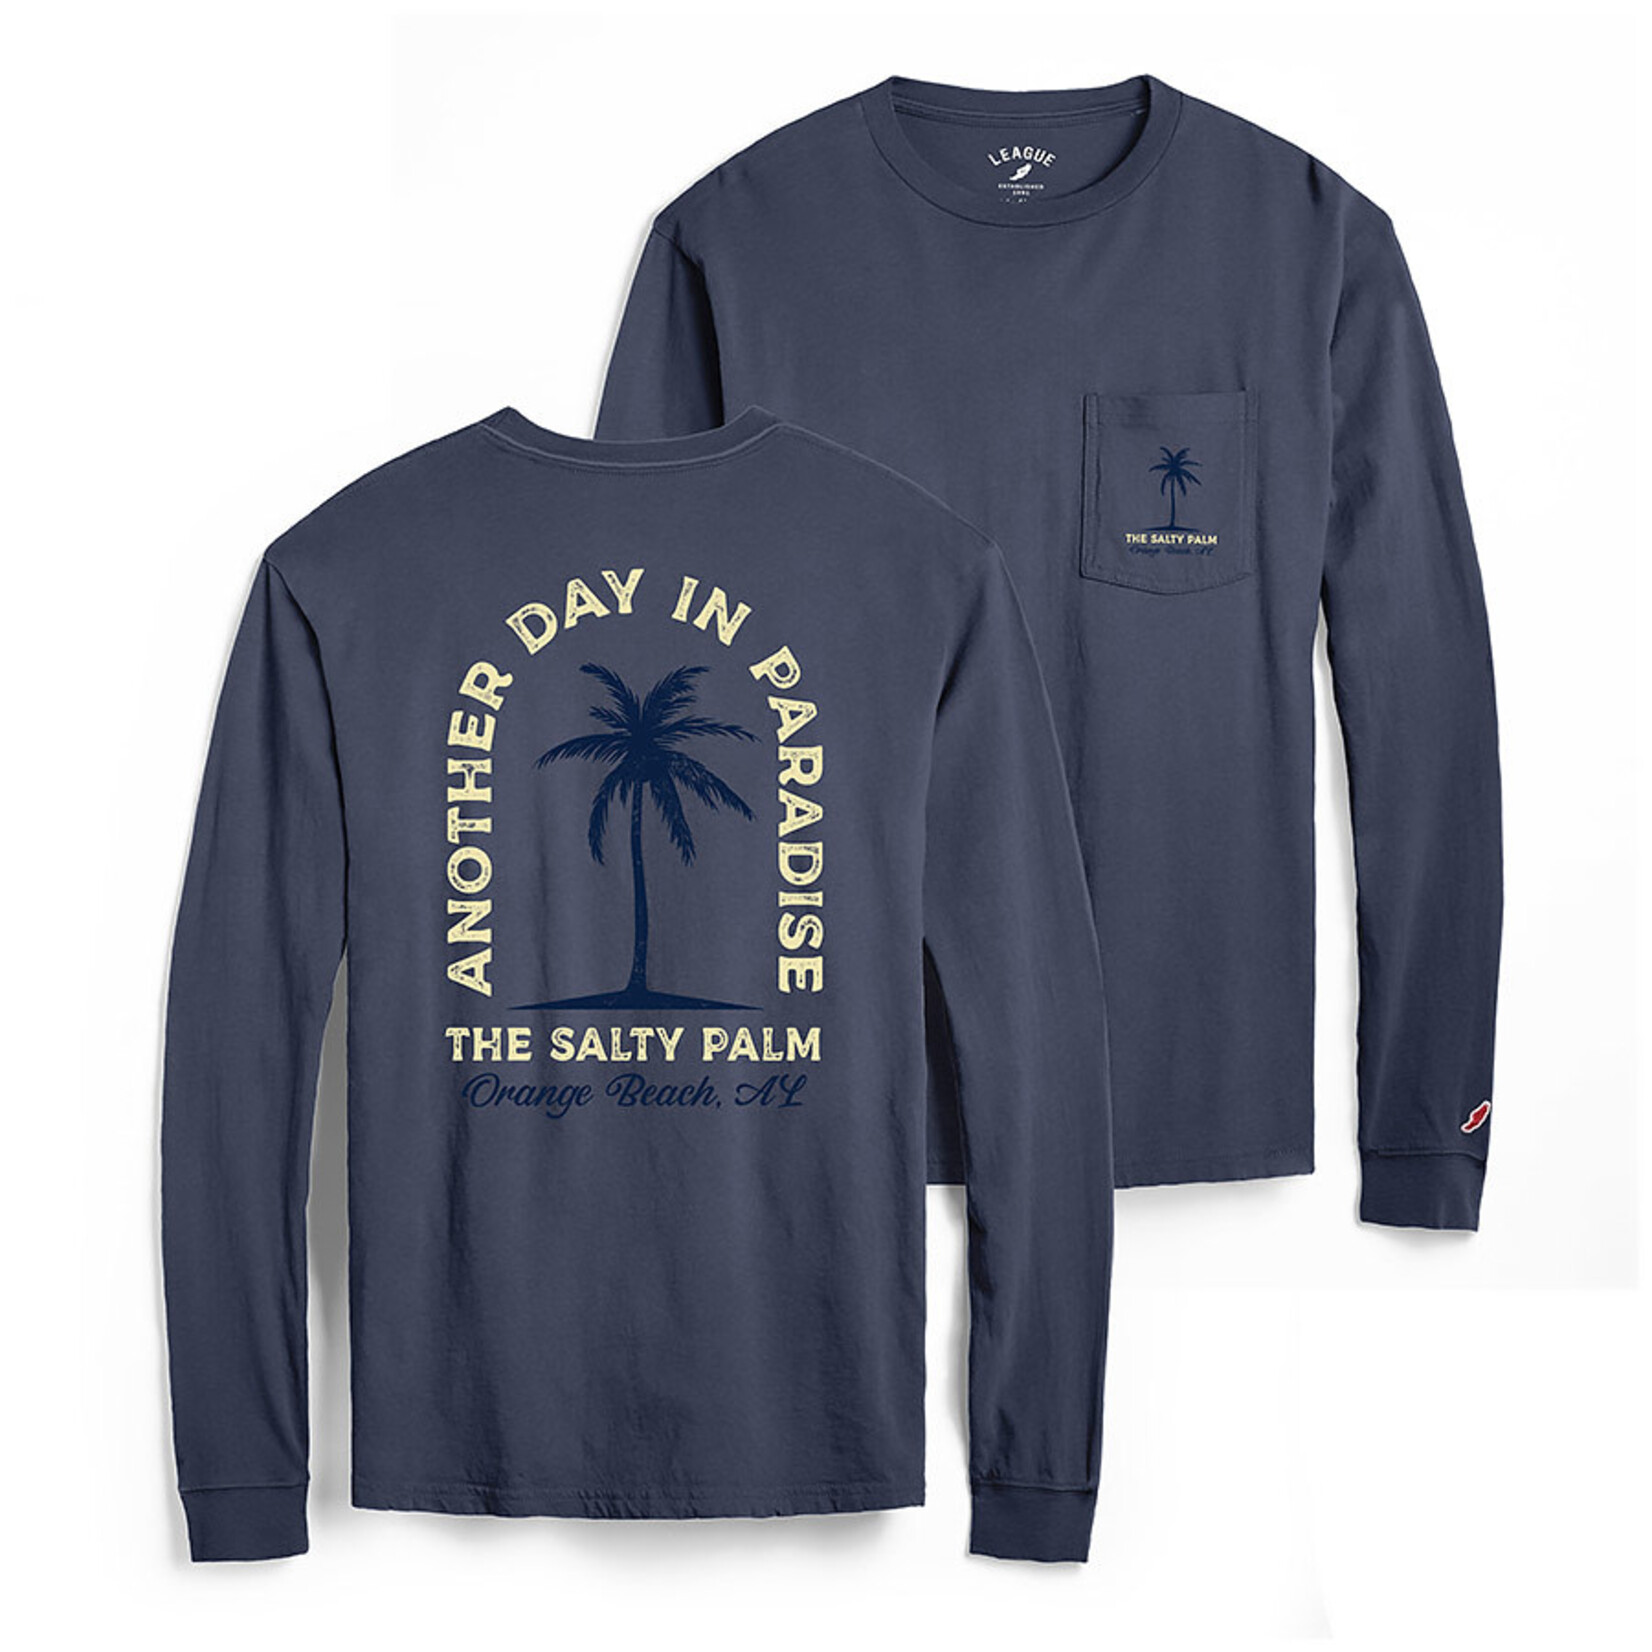 L2 Brands Day in Paradise Long Sleeve Pocket Tee